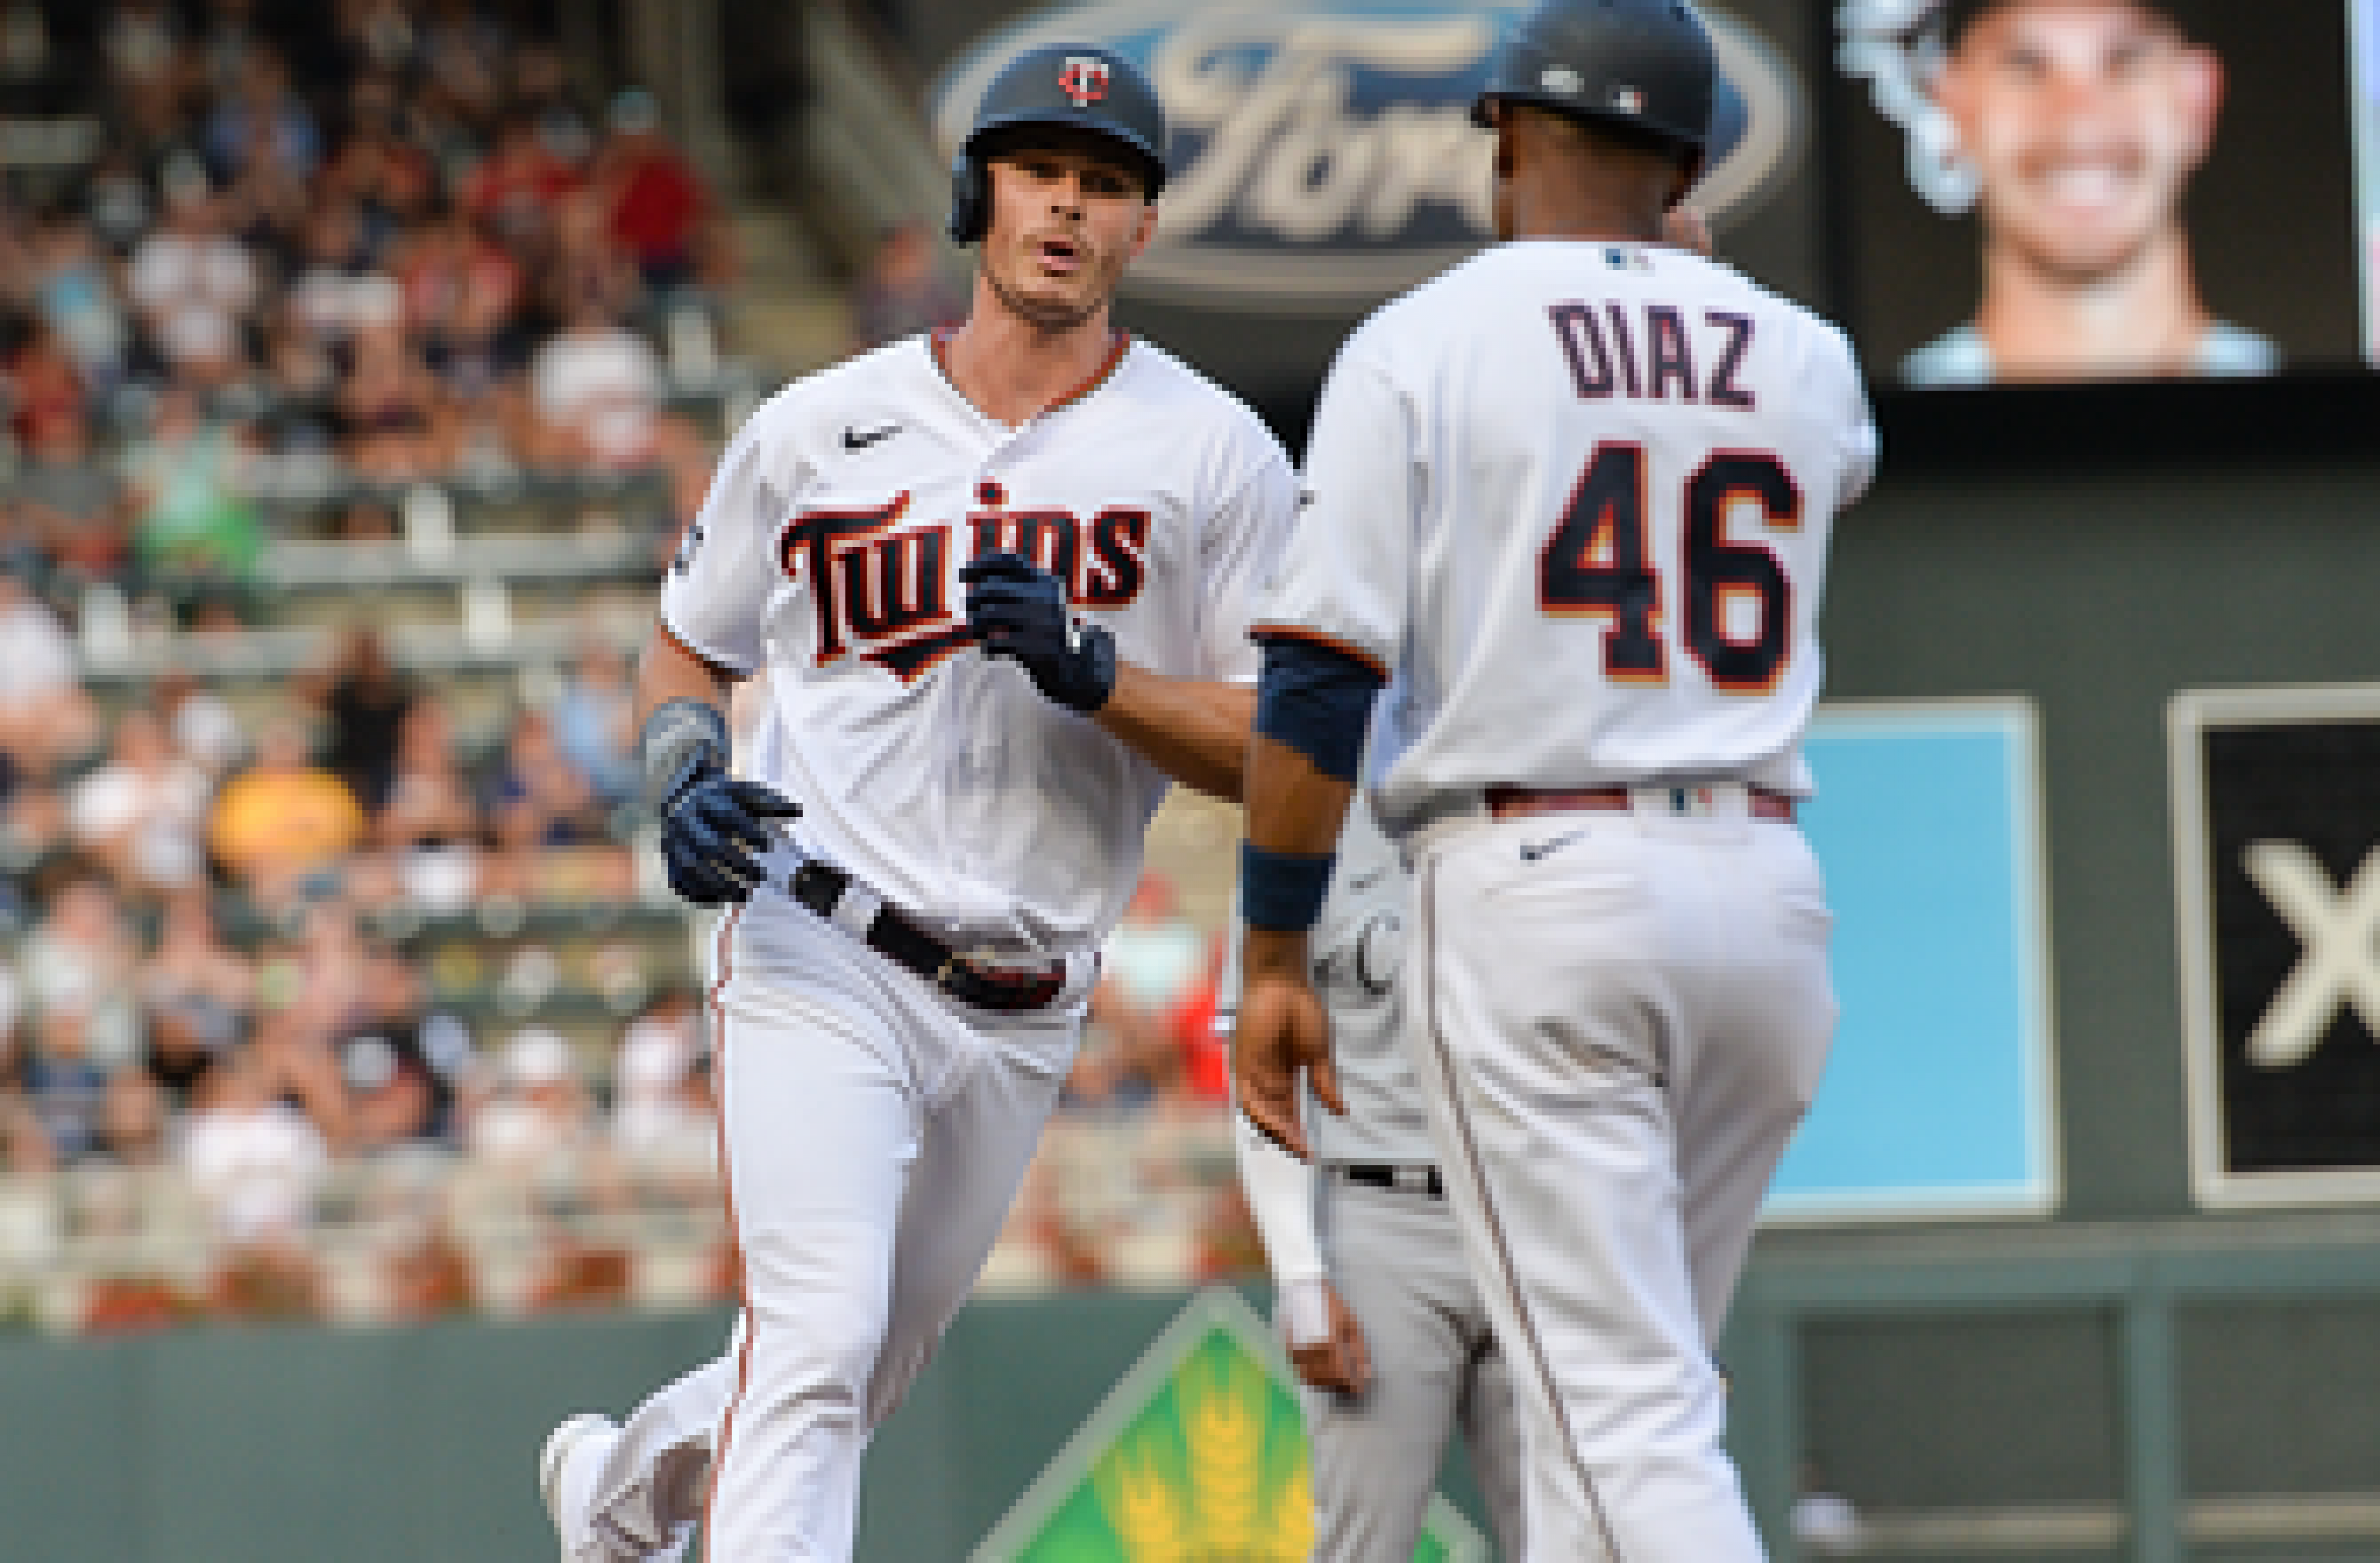 Max Kepler crushes two home runs as Twins down White Sox, 8-5